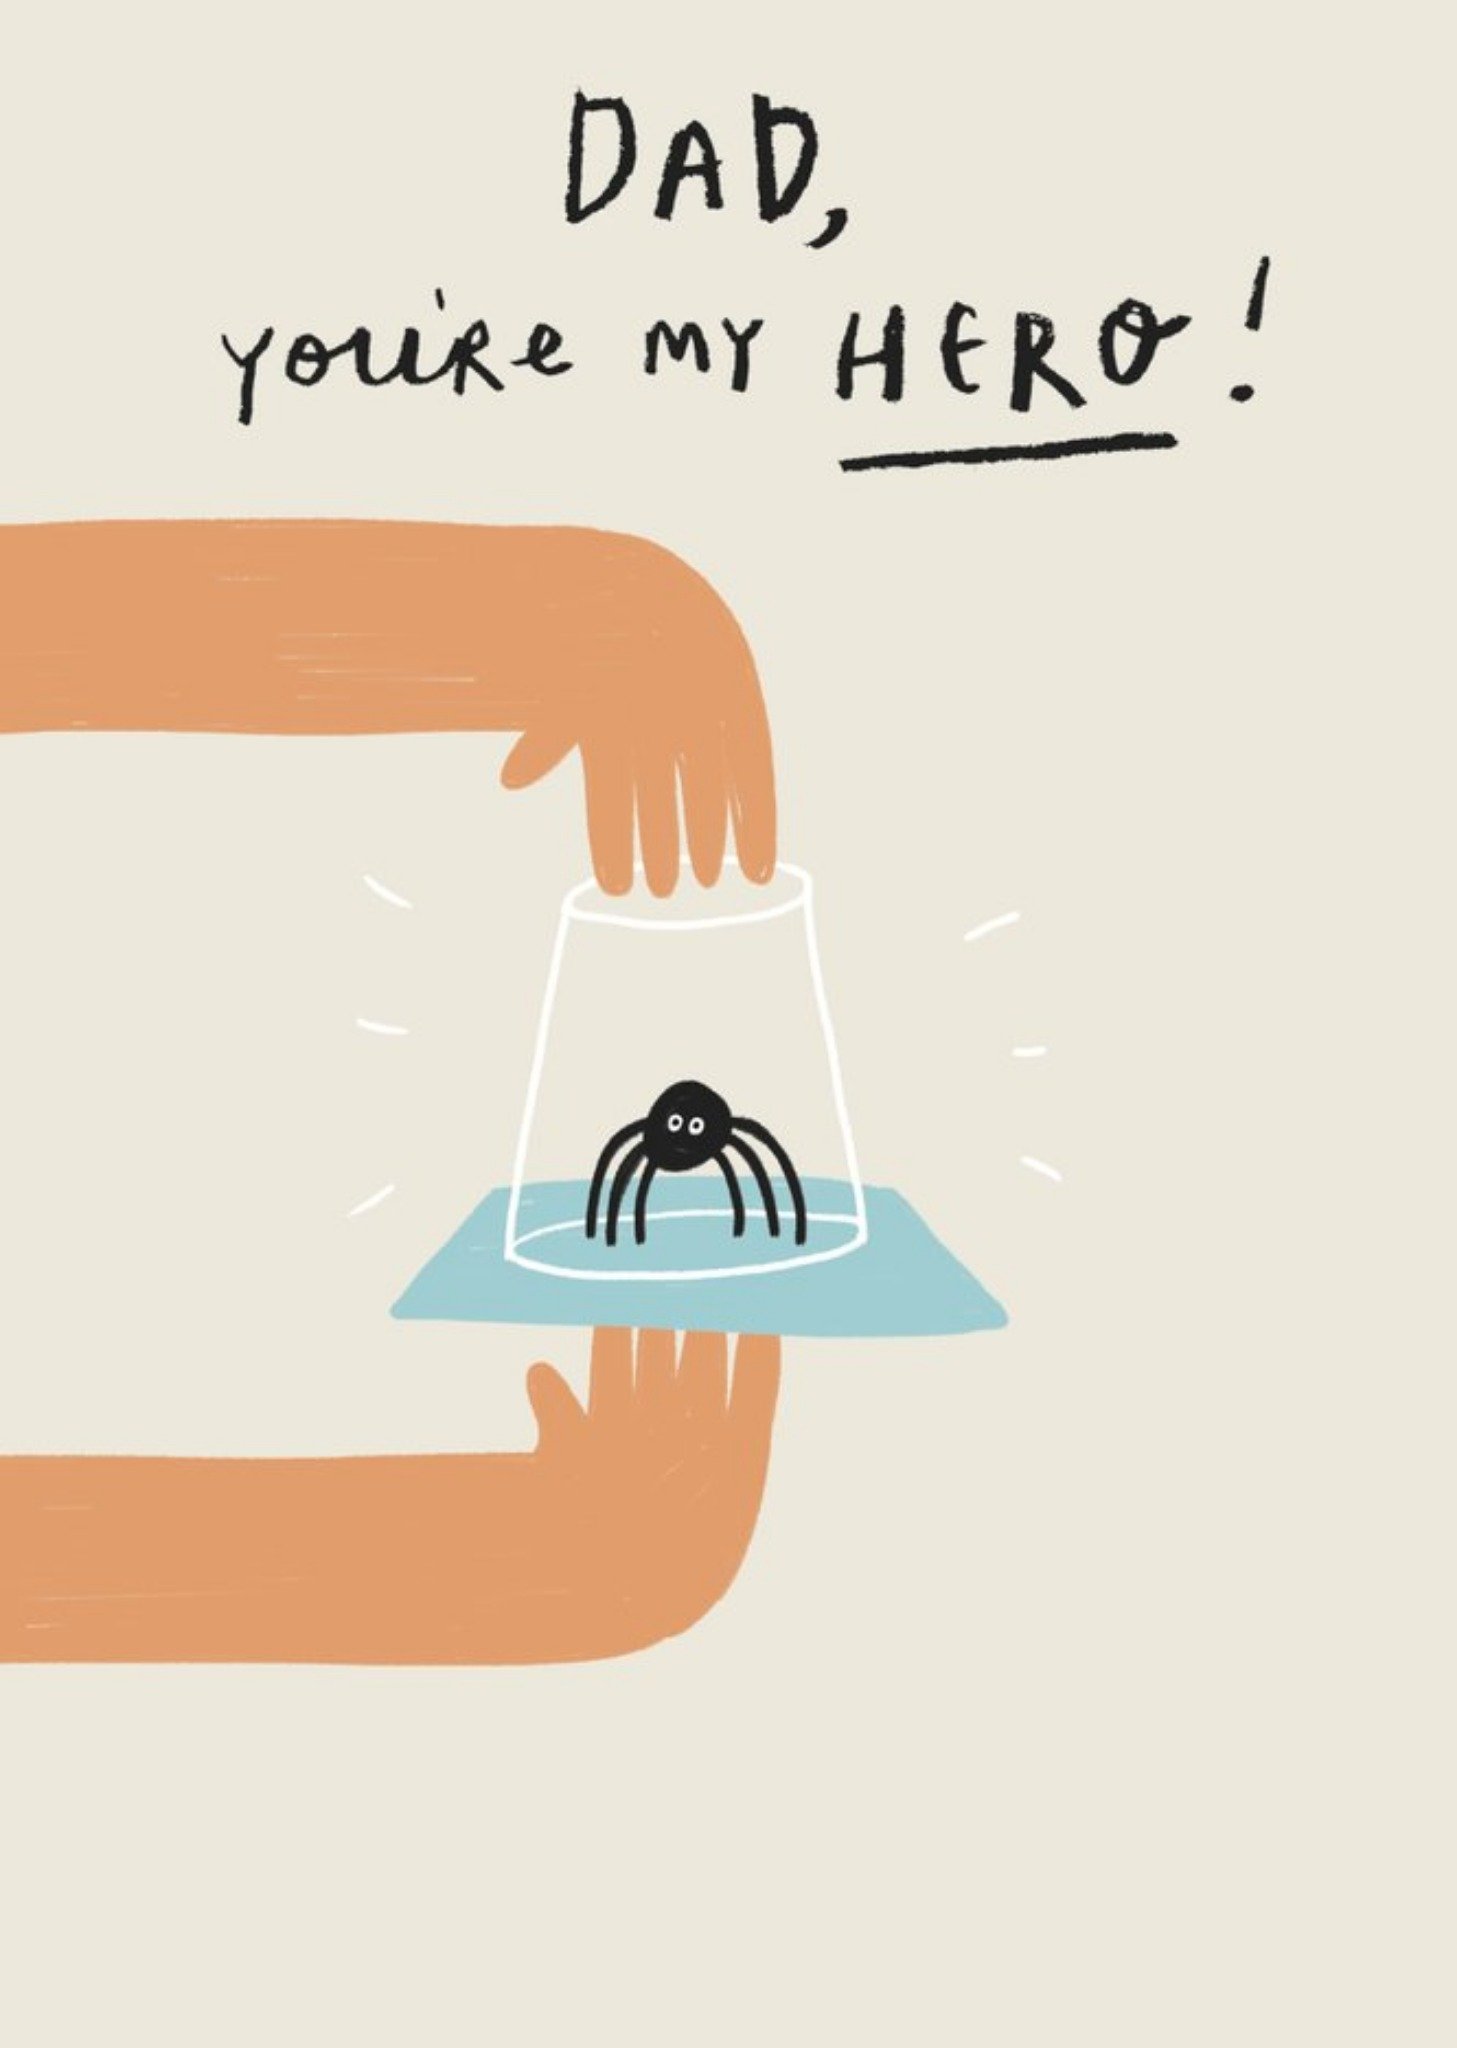 Moonpig Ukg My Hero Spider Catcher Father's Day Card, Large